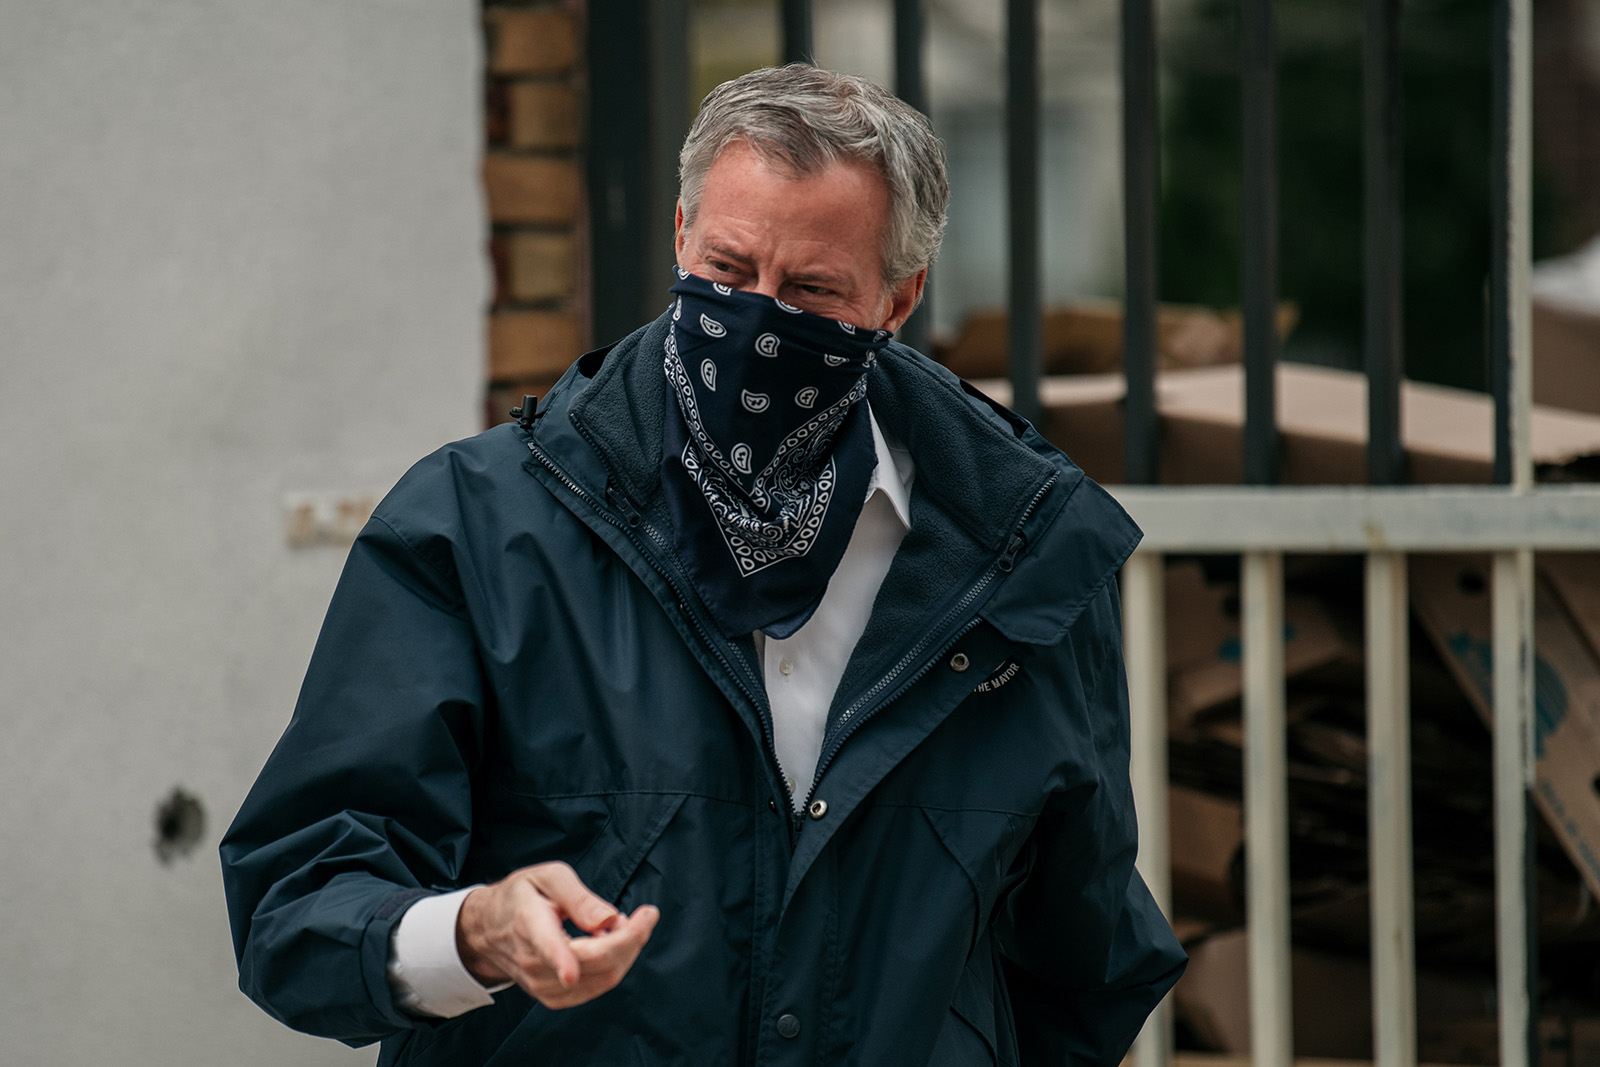 In this April 14, 2020 file photo, New York City Mayor Bill de Blasio wears a bandana over his face while speaking at a food shelf organized by The Campaign Against Hunger in Bed Stuy, Brooklyn.